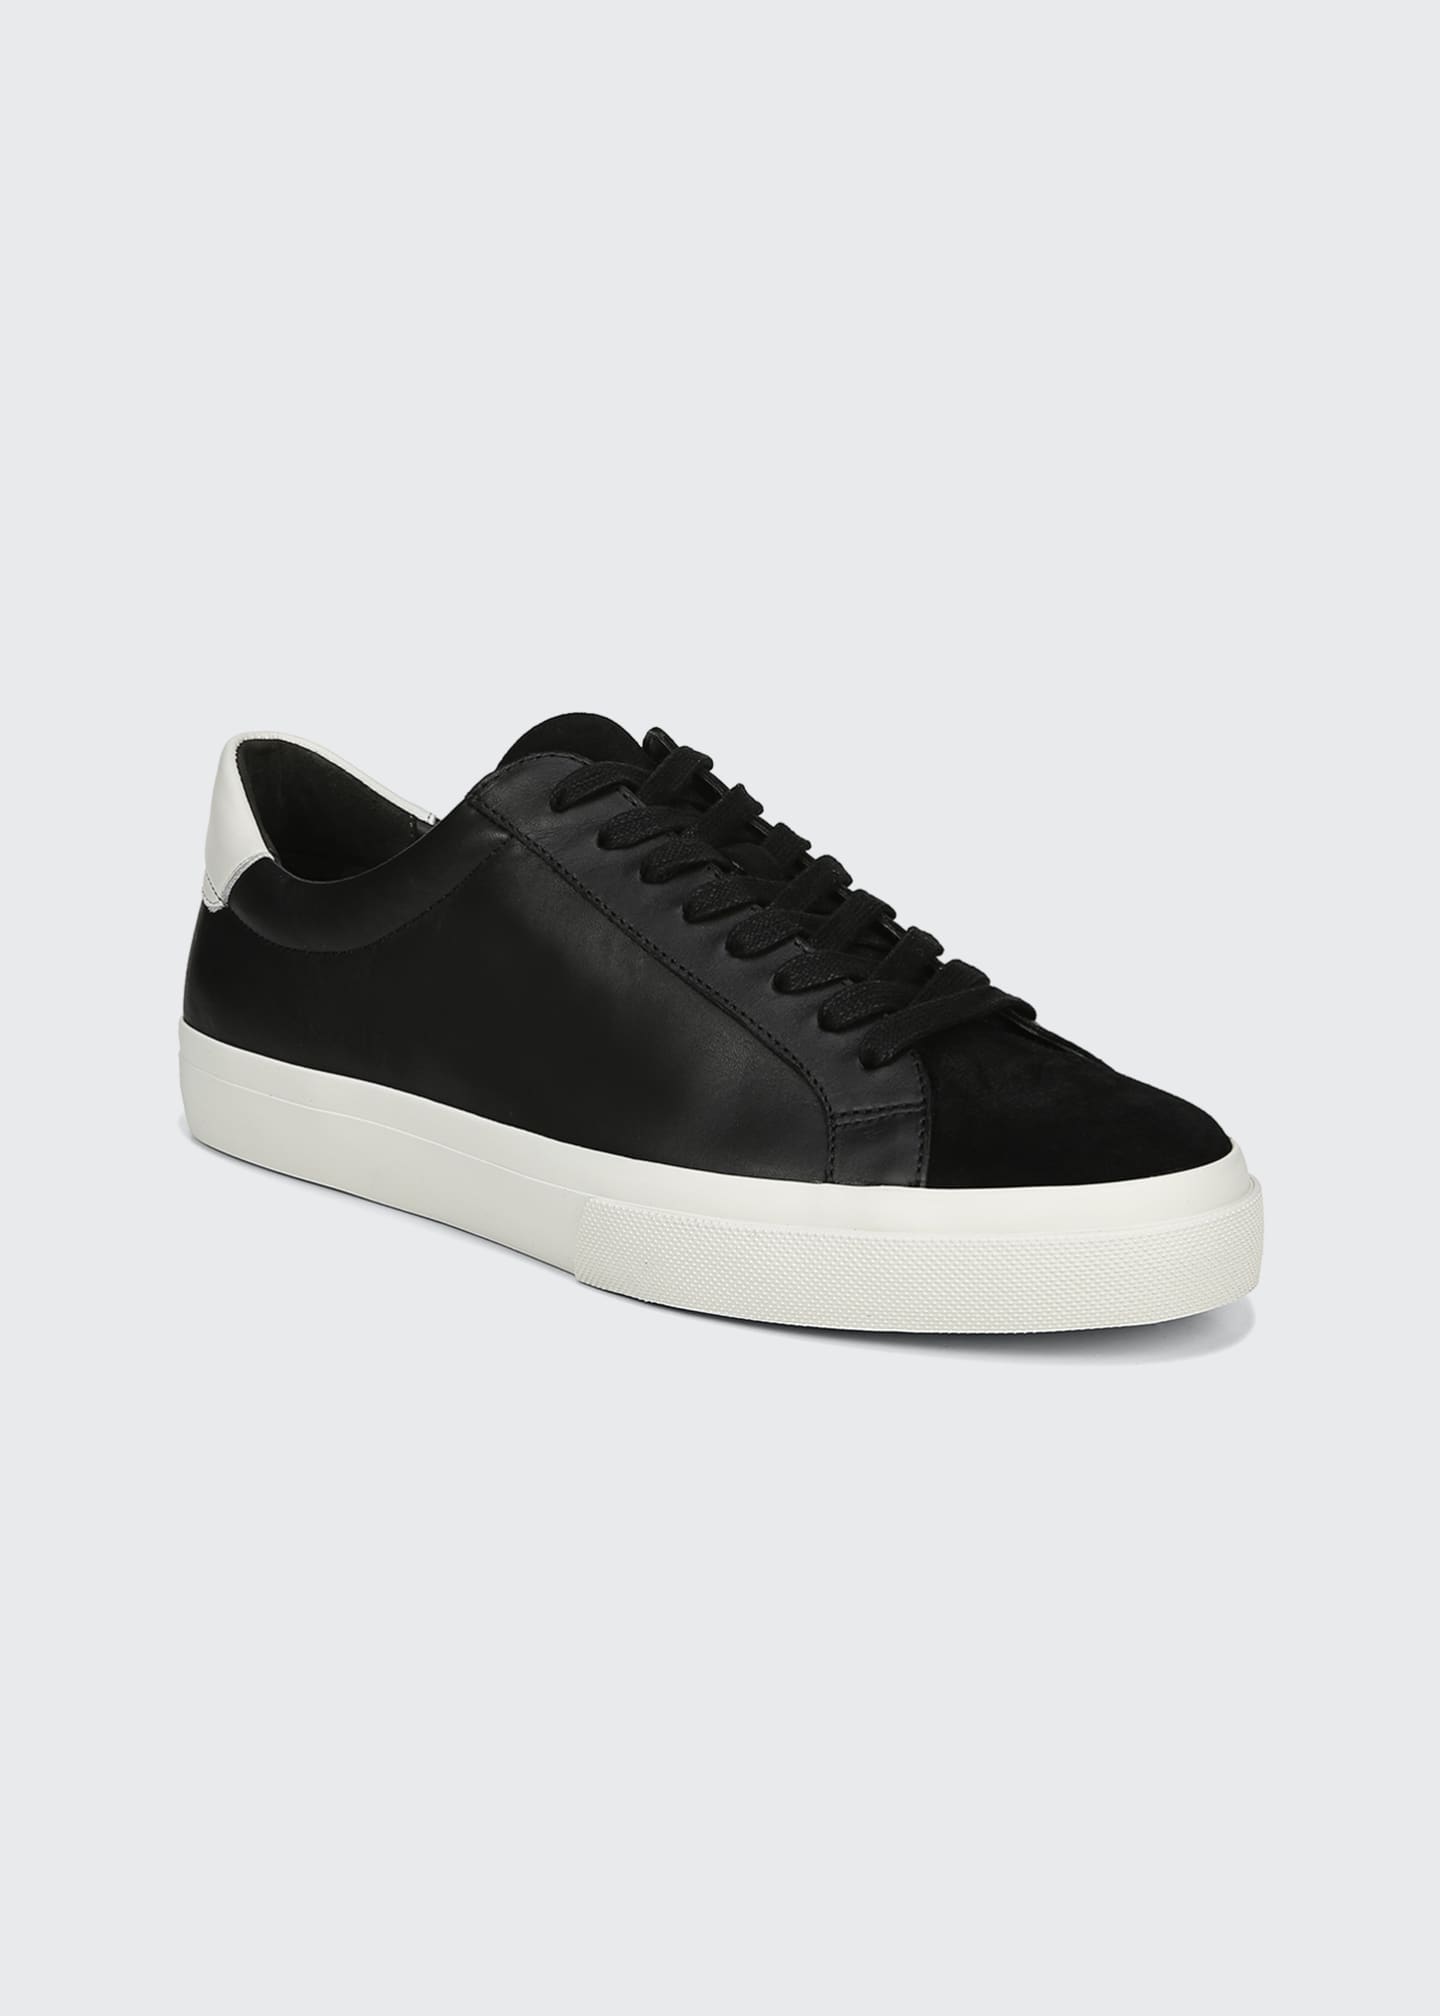 Vince Men's Fulton Leather and Suede Low-Top Sneakers - Bergdorf Goodman